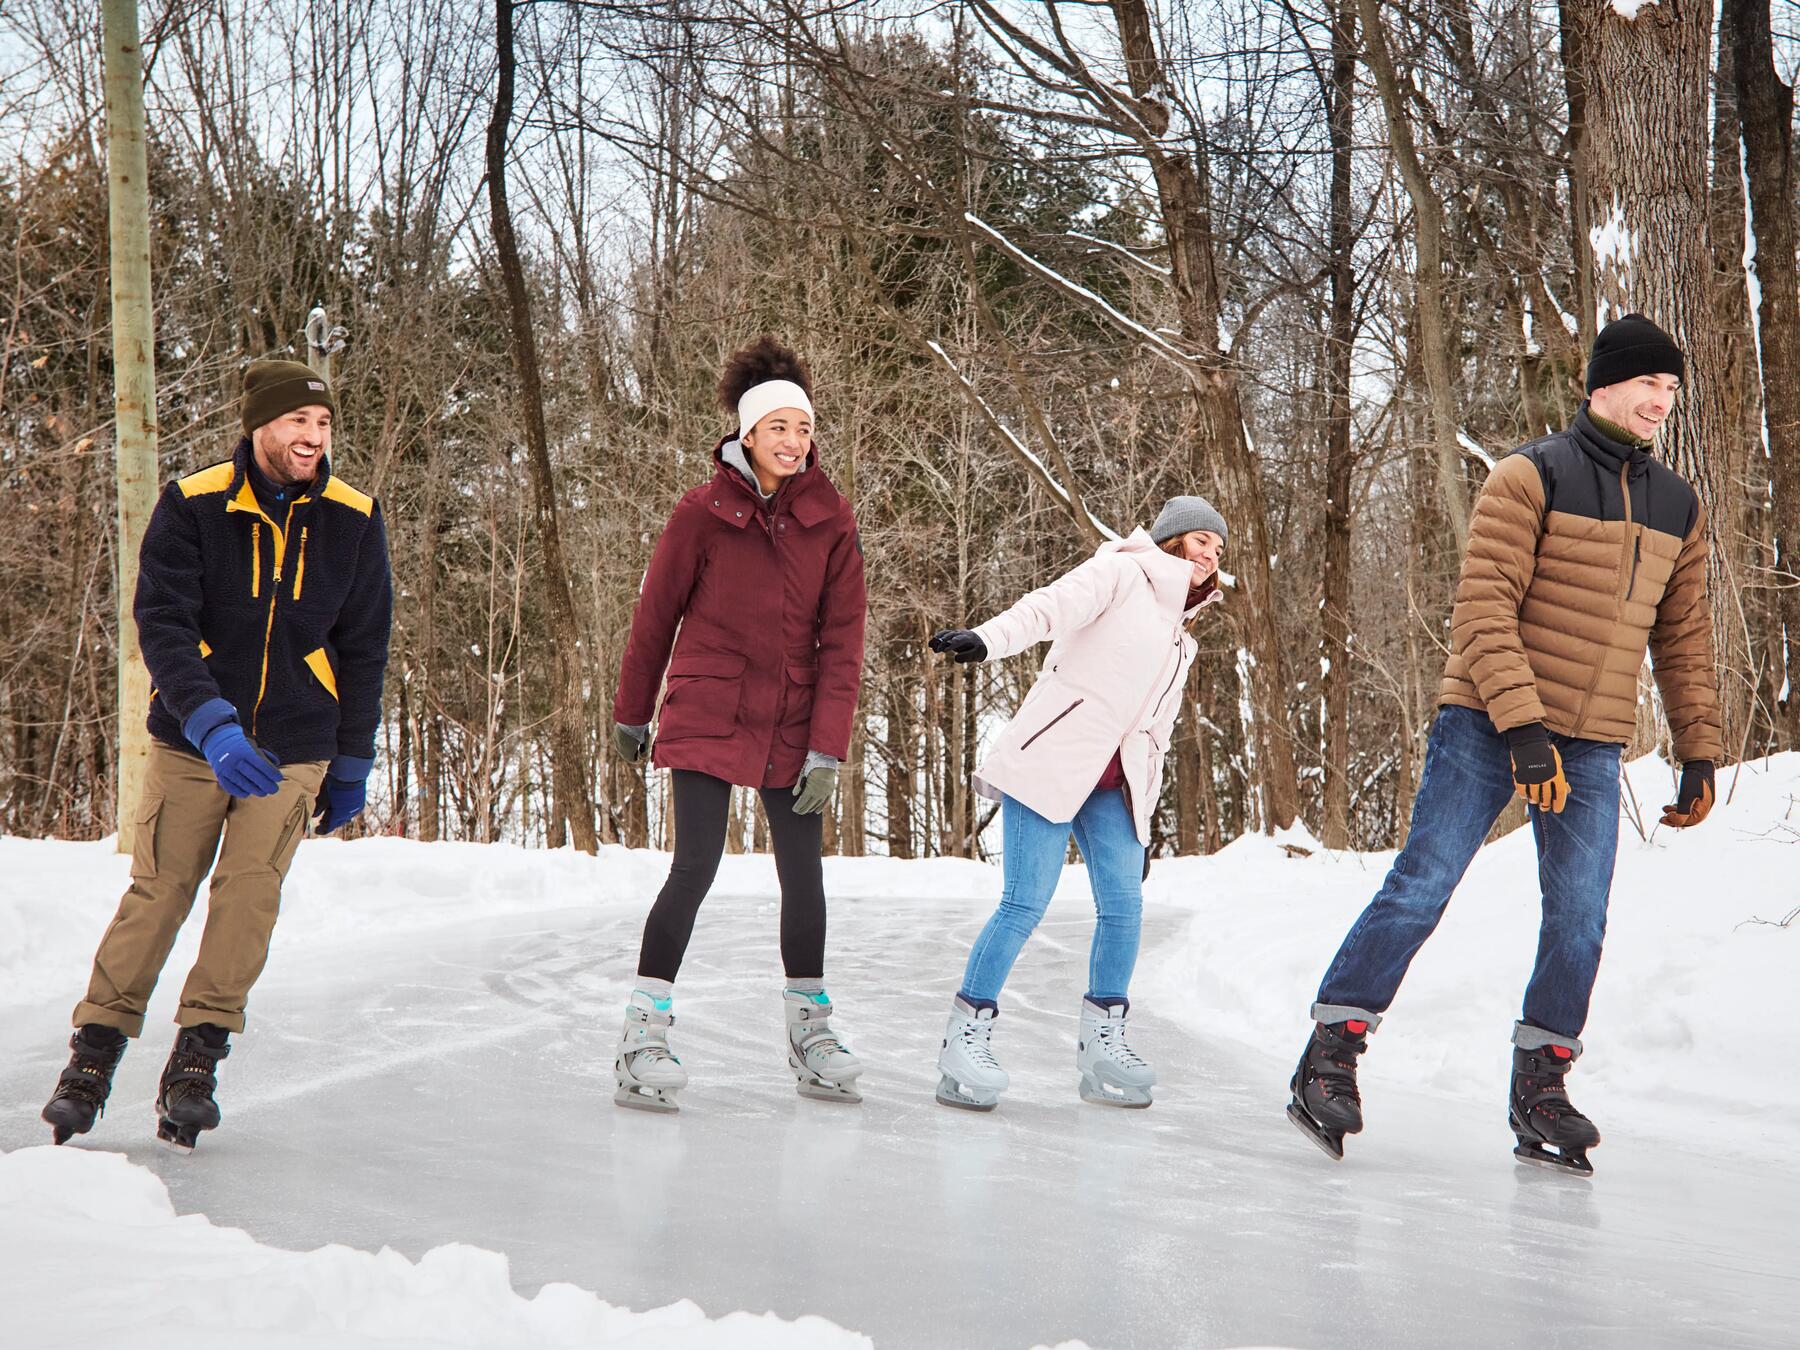 The health benefits of ice skating